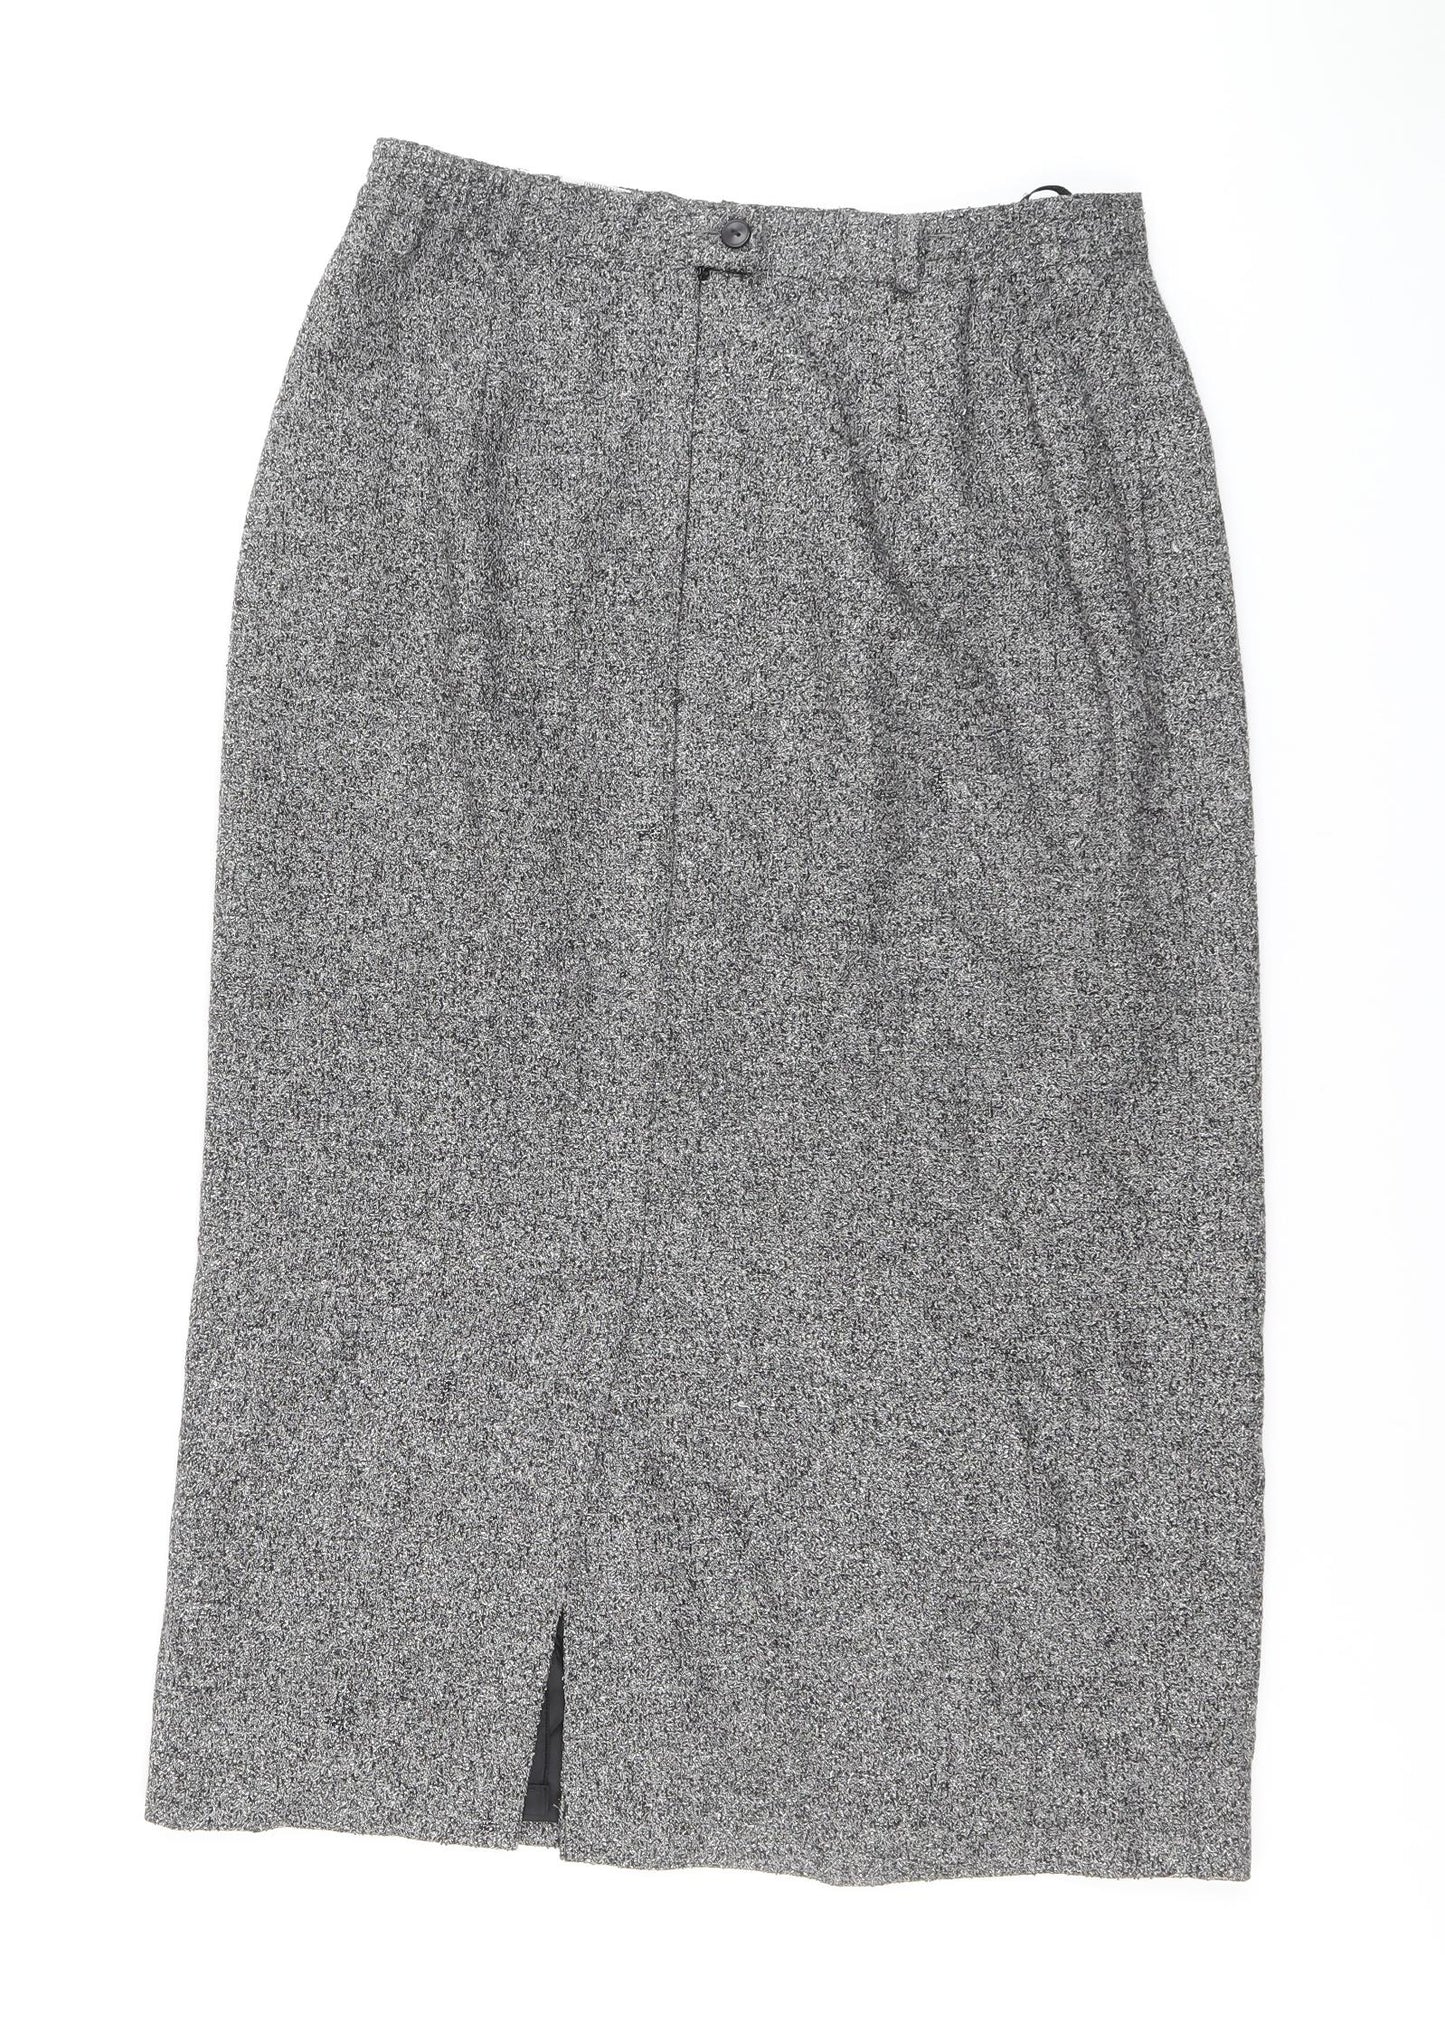 Marcona Womens Grey Wool A-Line Skirt Size 16 Button